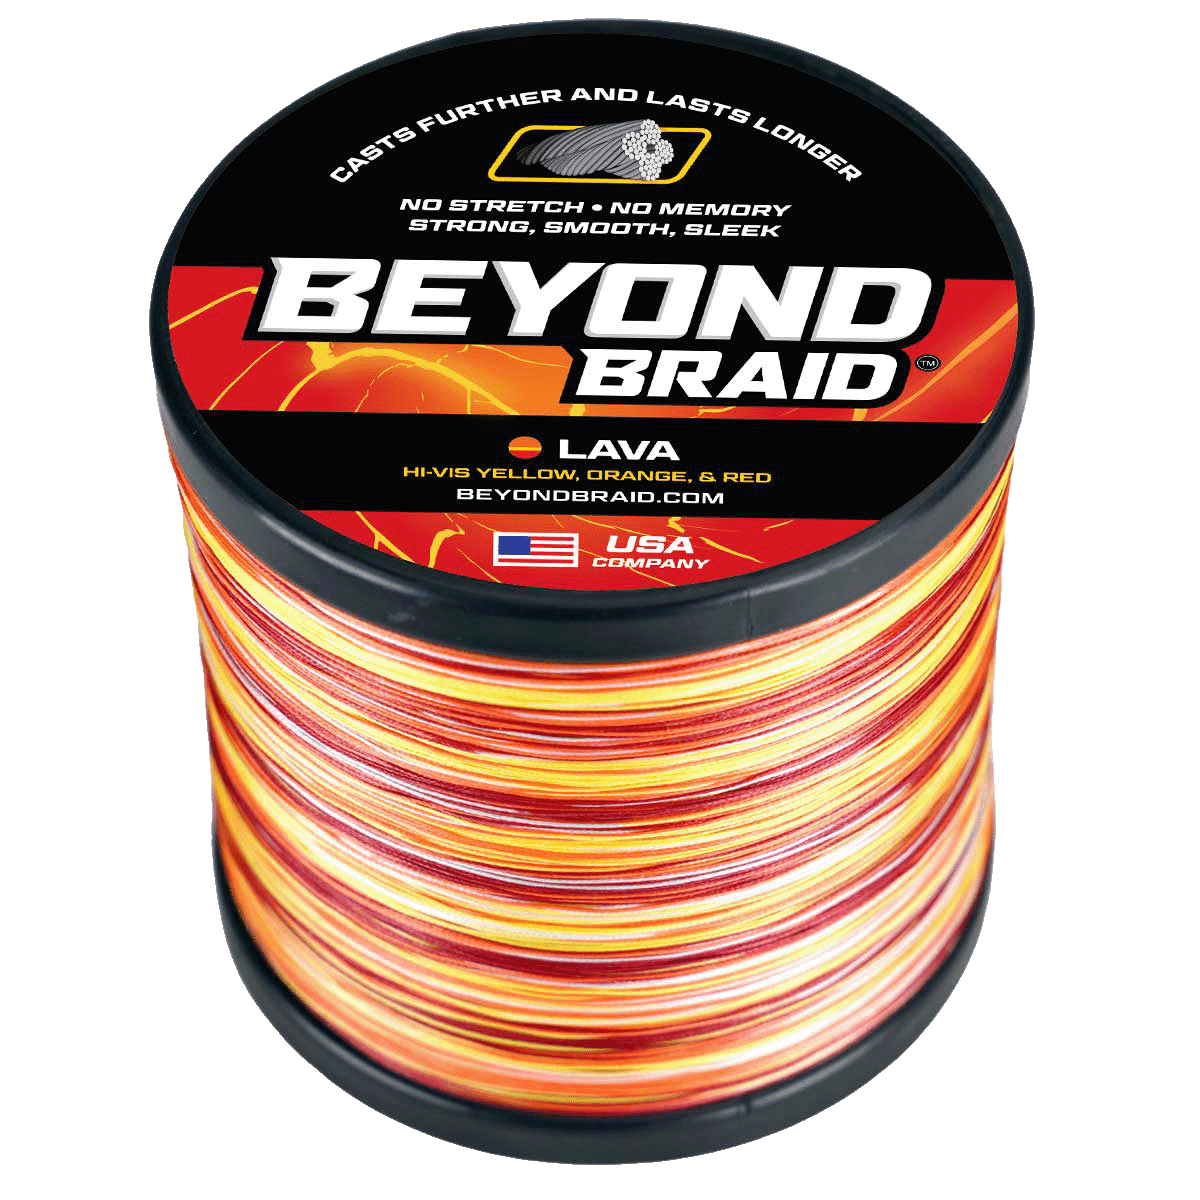 Lead Core Trolling Braid Multicolor Changes Every 10 Yards